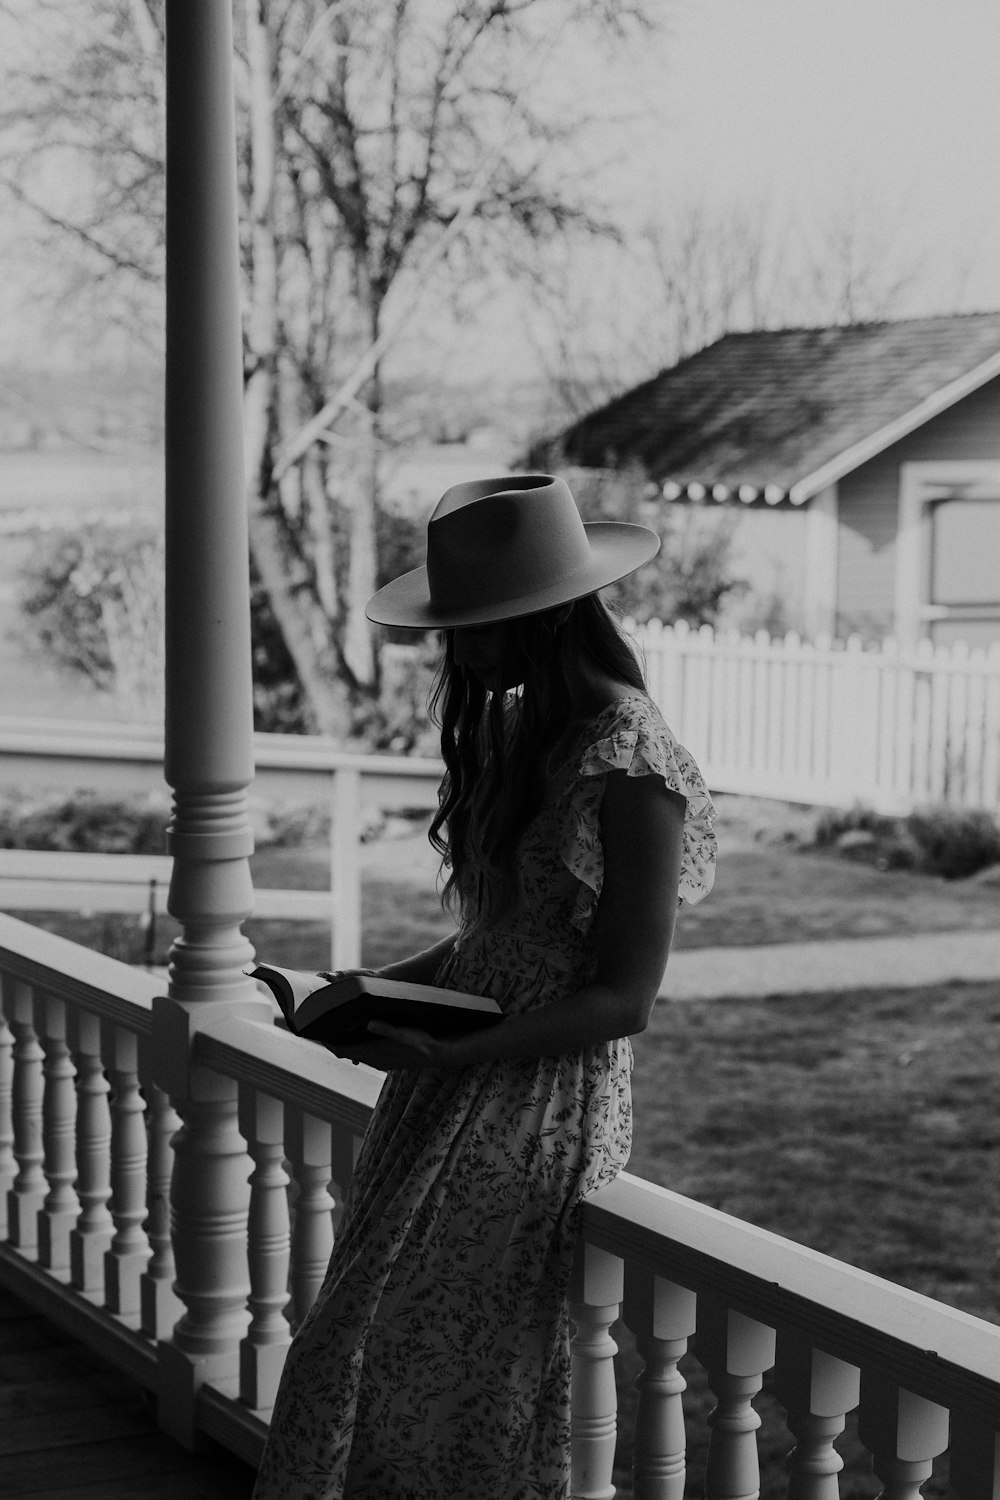 grayscale photo of woman in floral dress and hat sitting on wooden bench